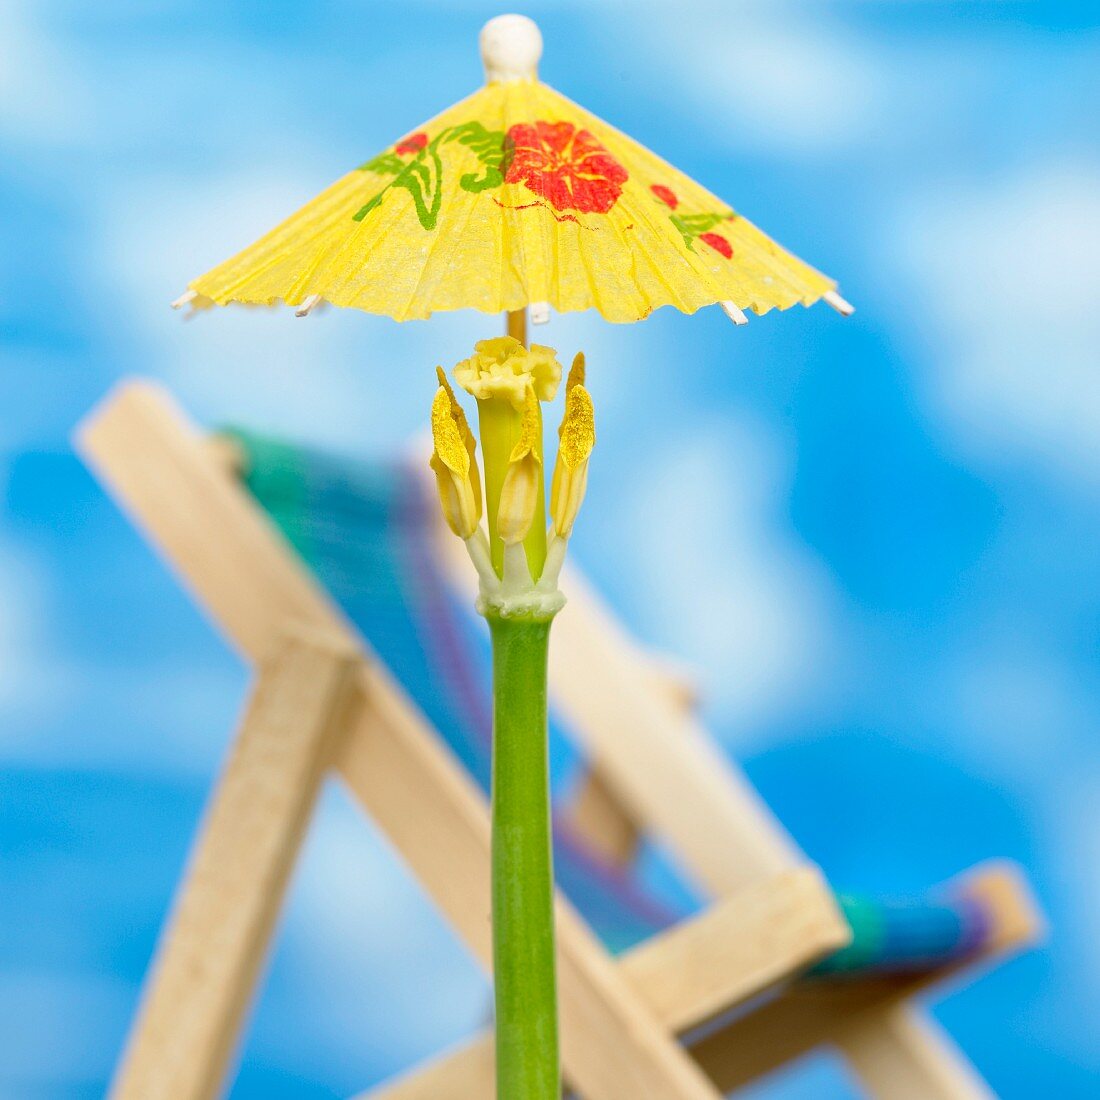 A cocktail umbrella stuck into a tulip stem with a deckchair in the background